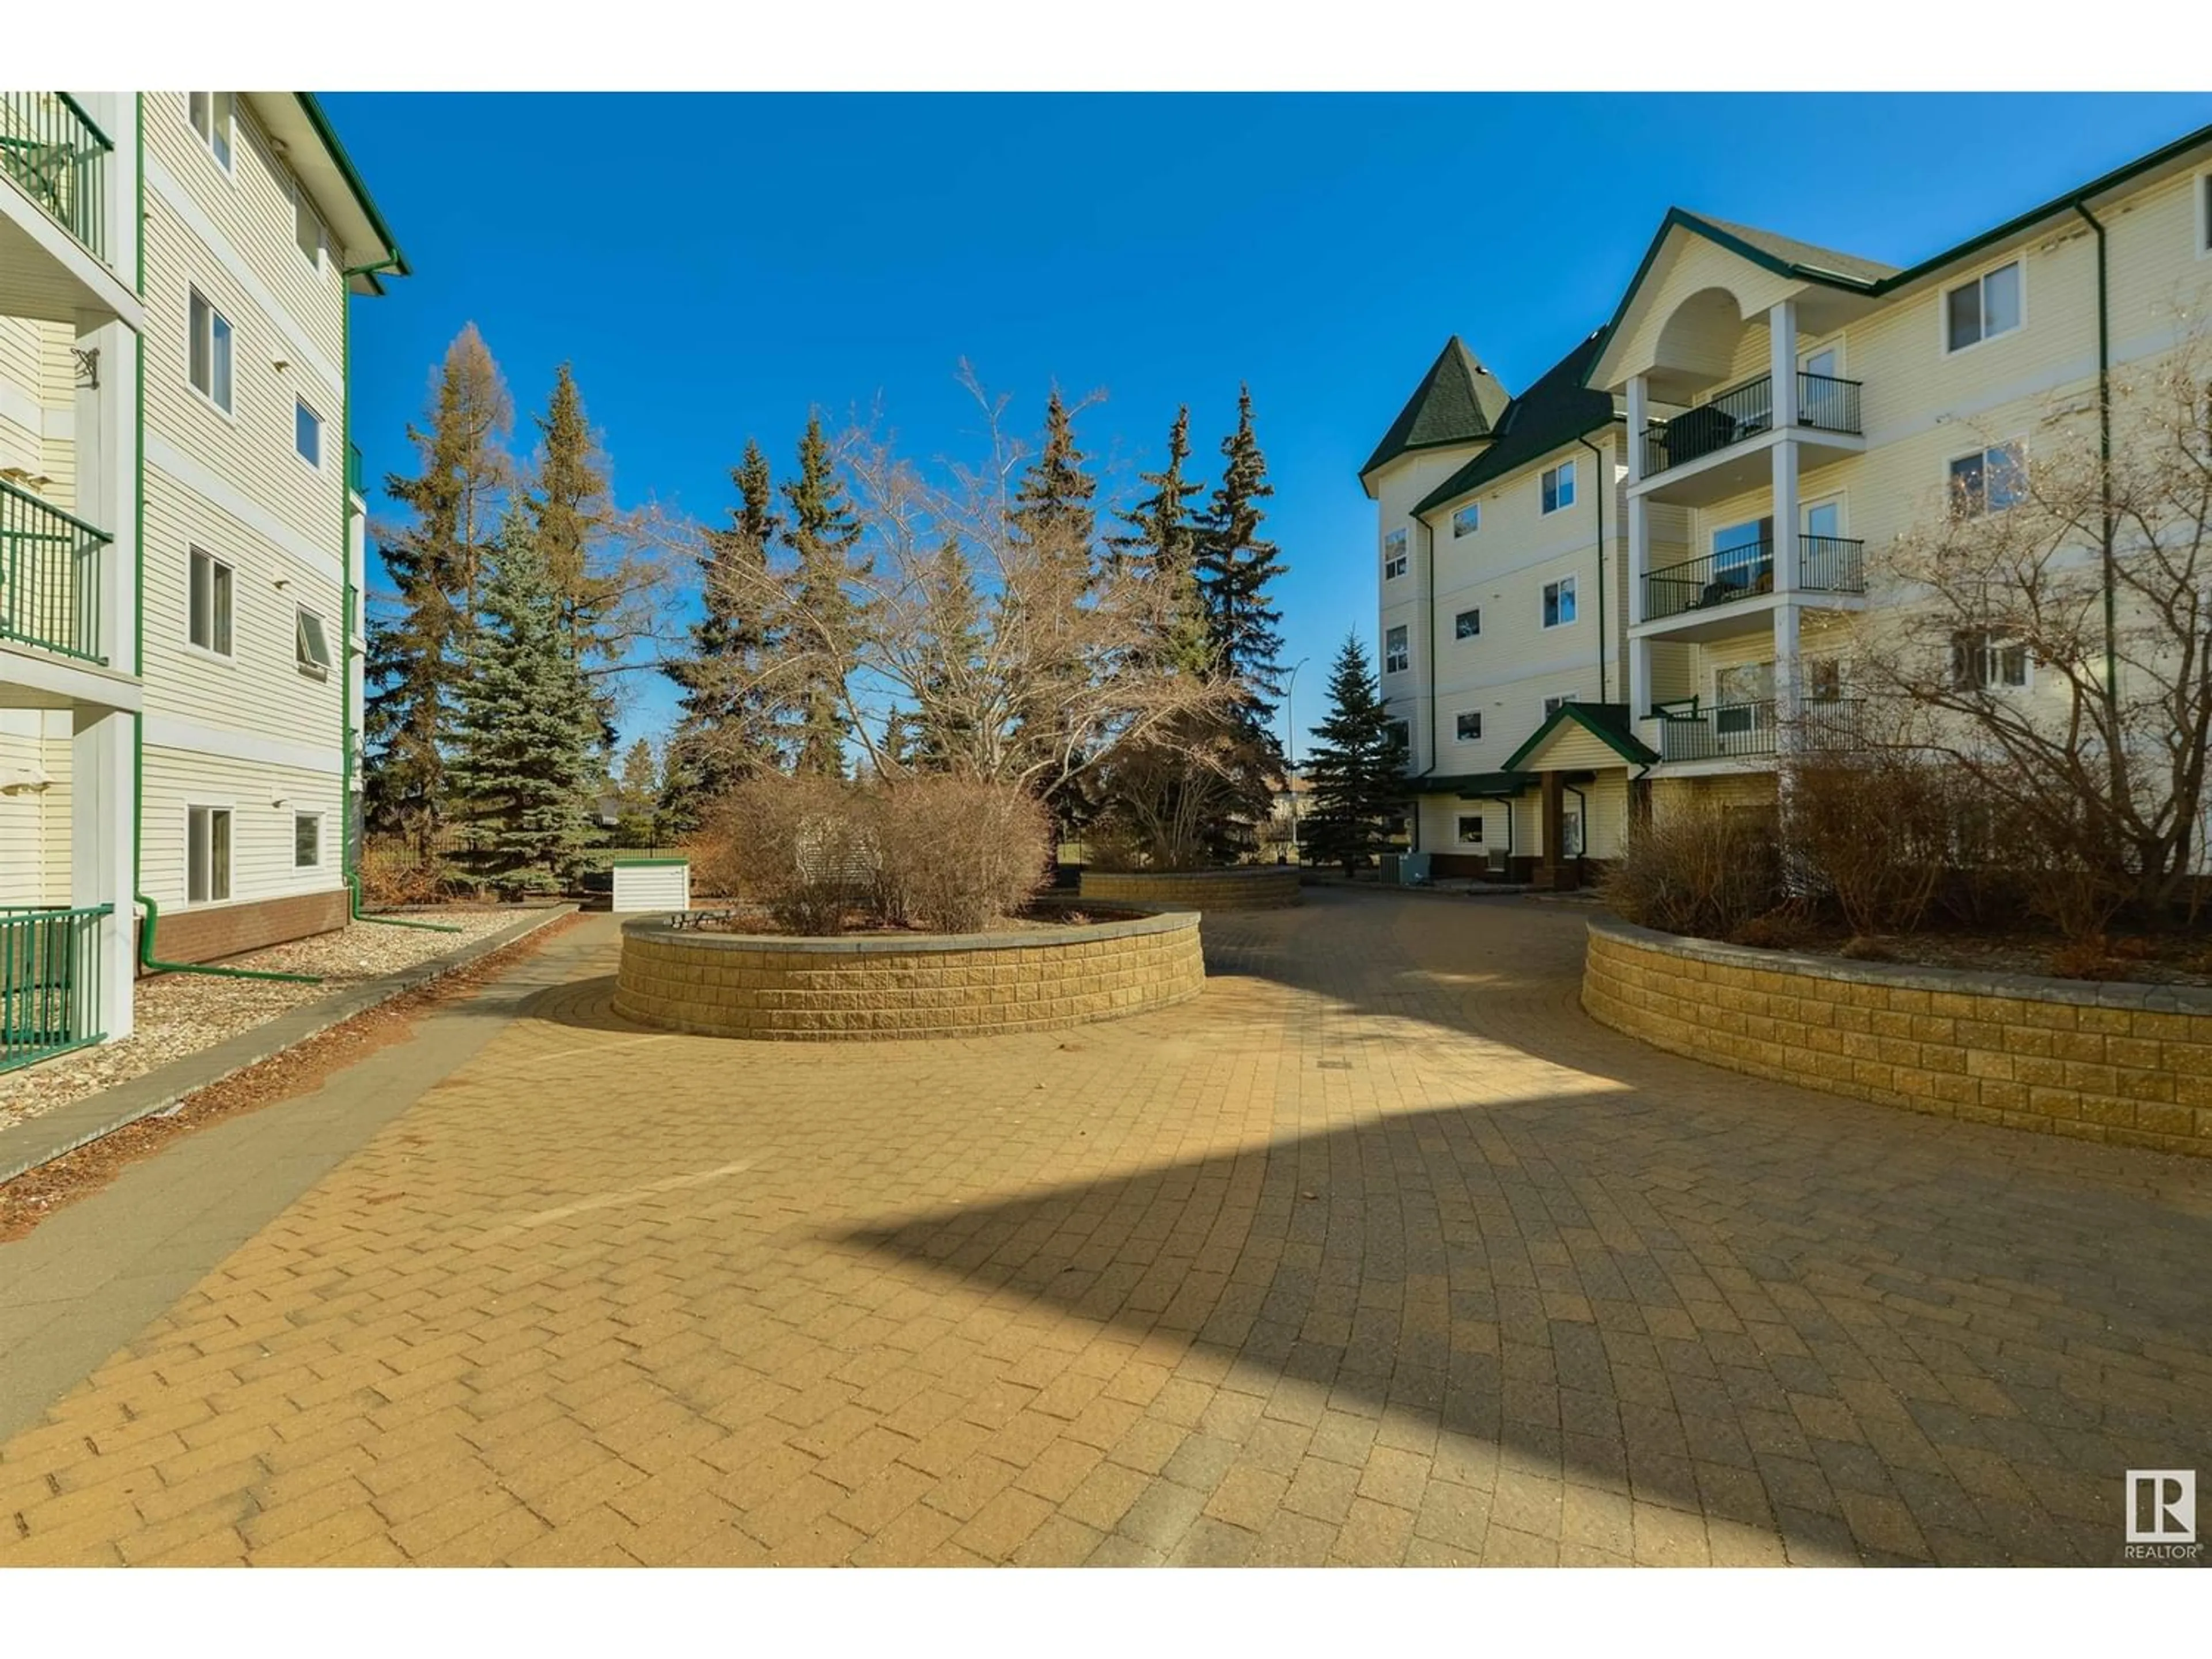 A pic from exterior of the house or condo for #204 13625 34 ST NW, Edmonton Alberta T5A0E3